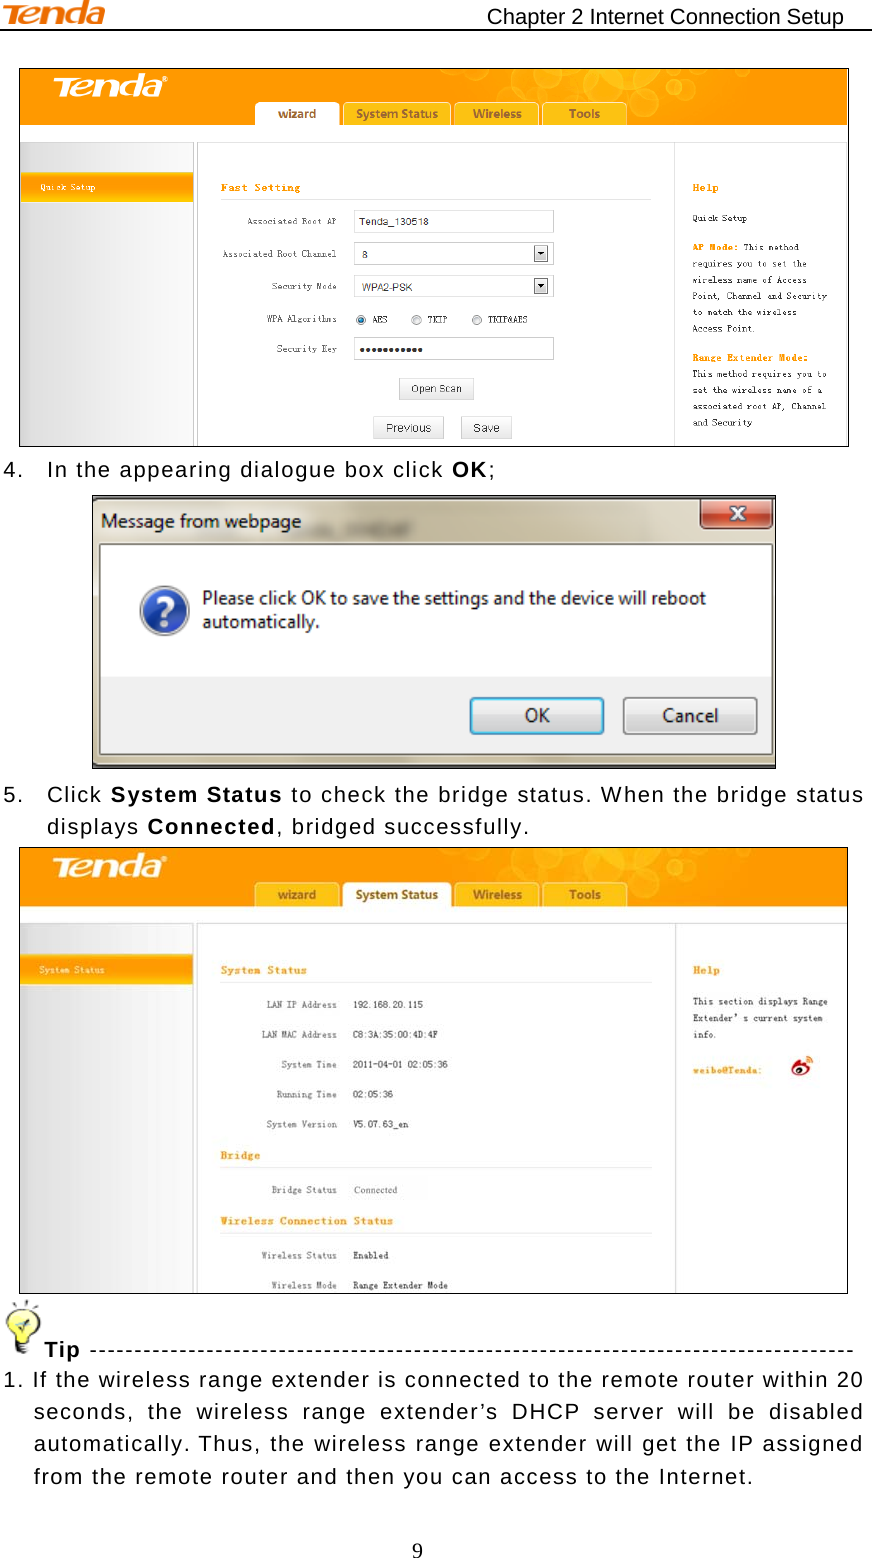                                    Chapter 2 Internet Connection Setup 9  4. In the appearing dialogue box click OK;  5. Click System Status to check the bridge status. When the bridge status displays Connected, bridged successfully.  Tip ------------------------------------------------------------------------------------- 1. If the wireless range extender is connected to the remote router within 20 seconds, the wireless range extender’s DHCP server will be disabled automatically. Thus, the wireless range extender will get the IP assigned from the remote router and then you can access to the Internet.   